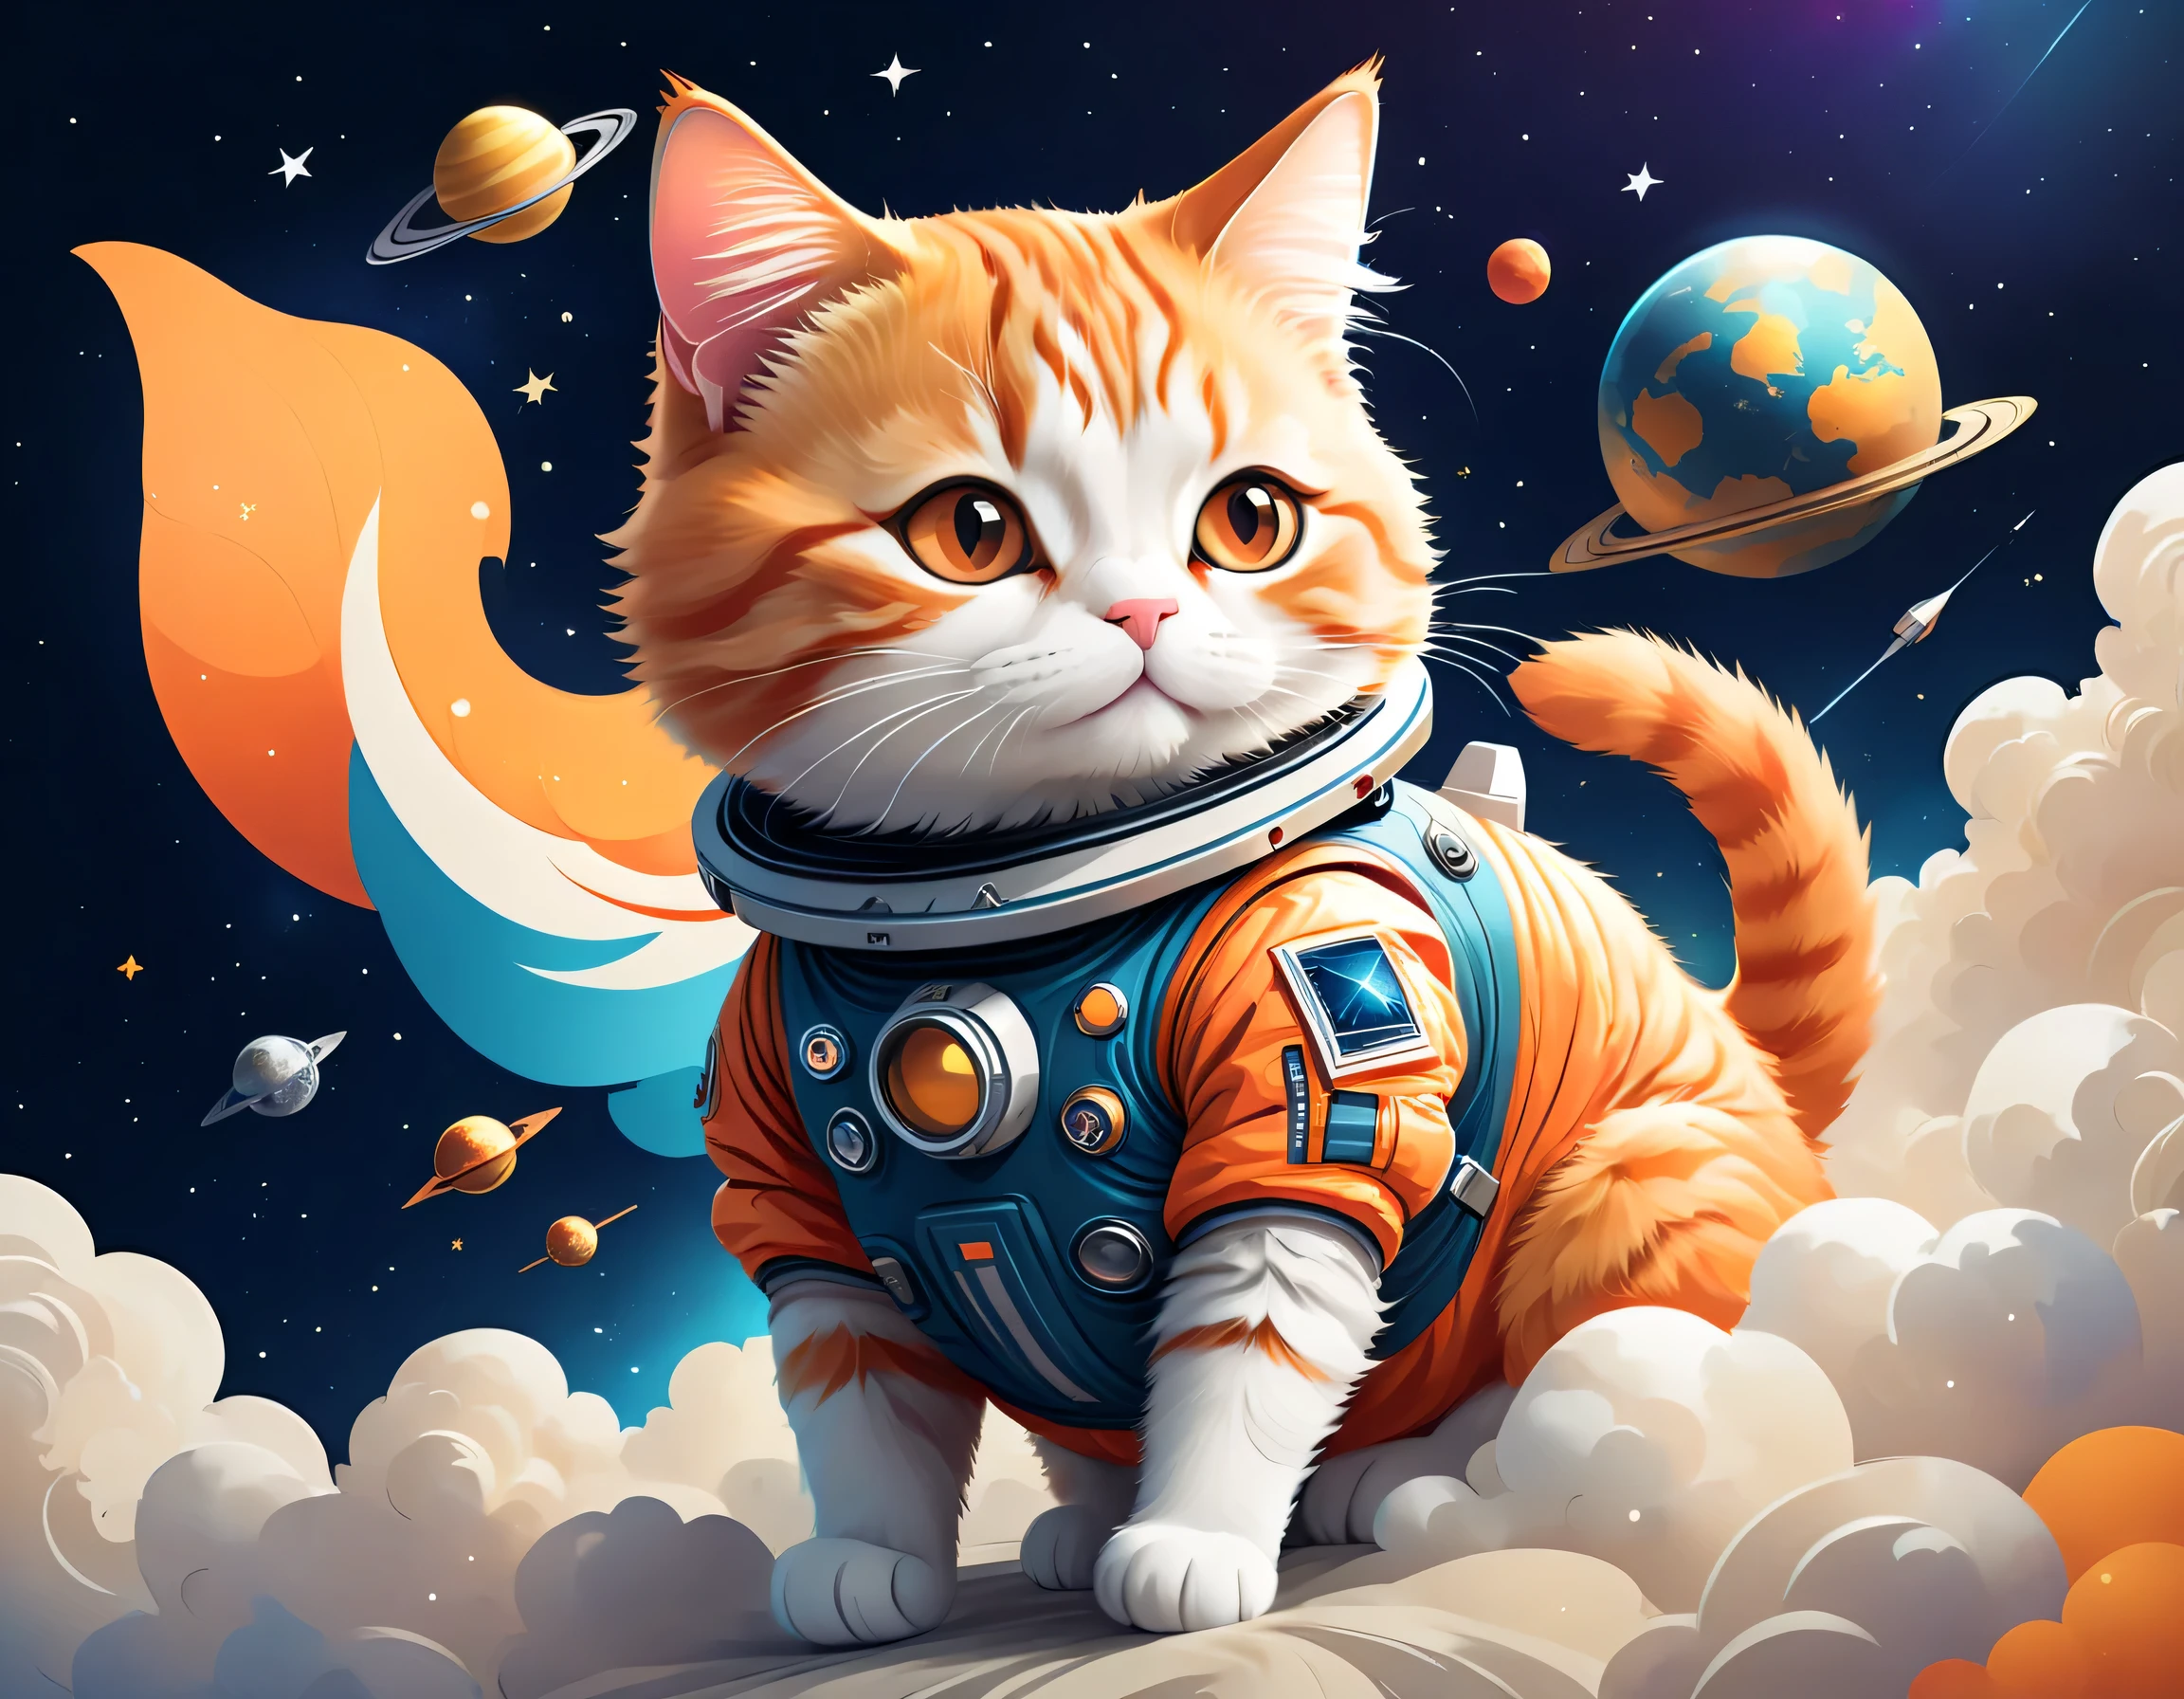 vector art:Cat astronaut,draw with thick lines,illustration,adobe,flat design,Works created by professional designers,超Brilliant宇宙旅行,orange cat:Spacesuit,Rocket emblem,technology,adventure,Inside the spaceship,Stainless steel panel,monitor,Control panel,spaceship windows,no gravity,buoyant,floating object,cute,Fantastic,Brilliant,Bokeh effect,fun,Wonderful,joy,masterpiece,最高masterpiece,rich colors,colorful,cool,rendering,zentangle elements,line art,